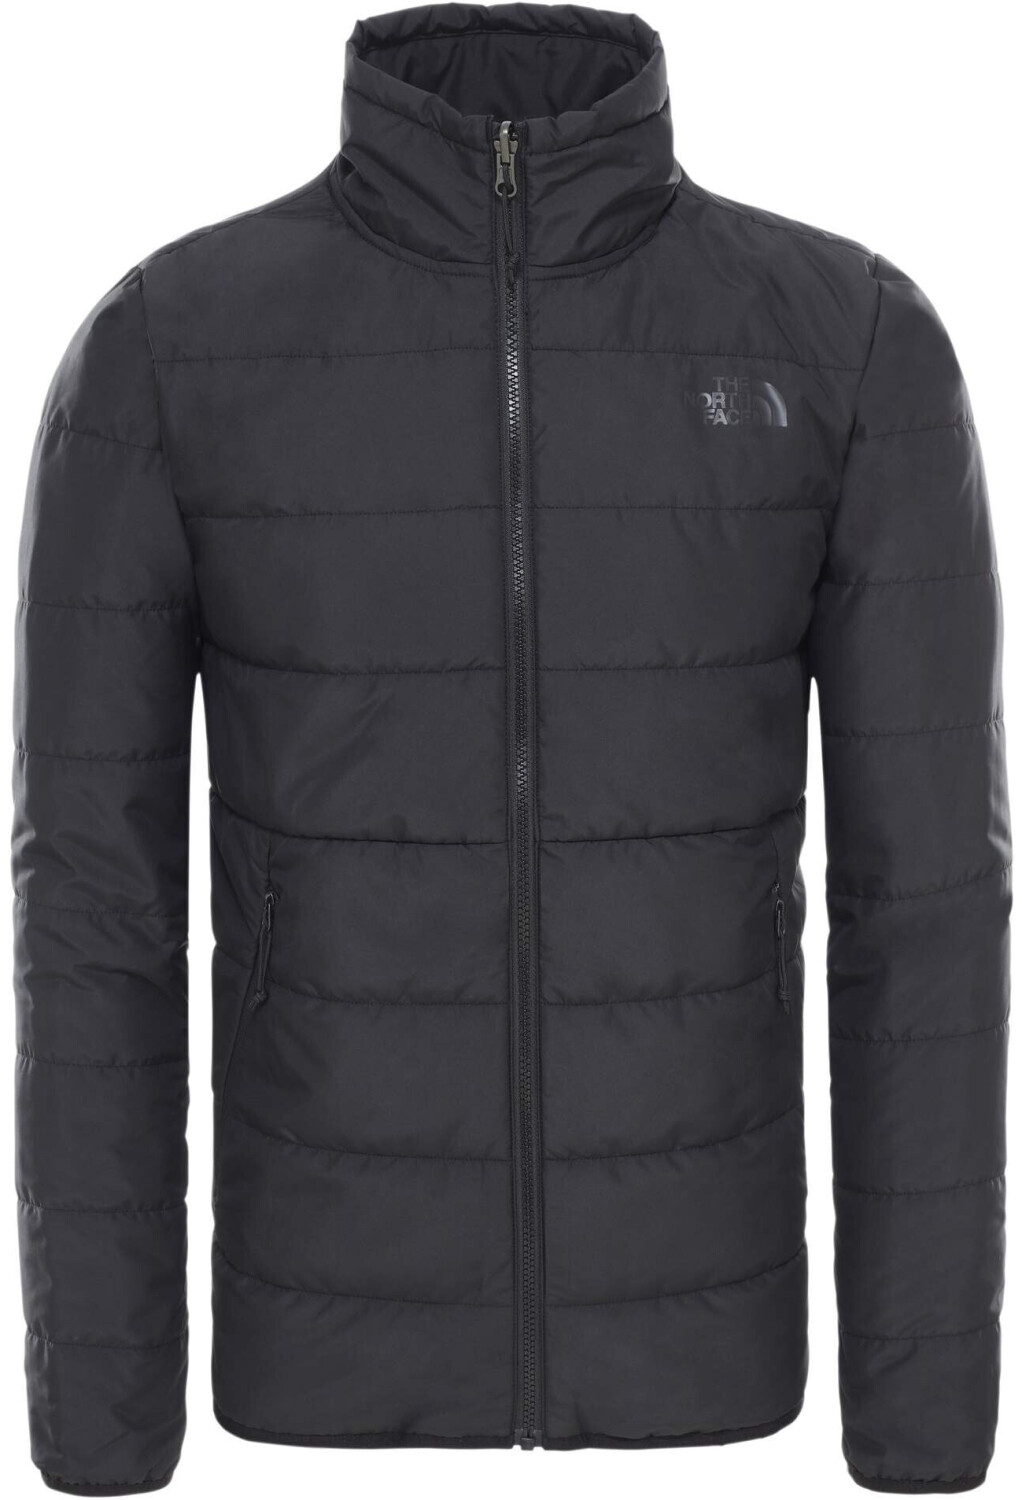 Buy The North Face Men's Carto Zip-In Triclimate Jacket tnf black/tnf black from Â£119.90 (Today 